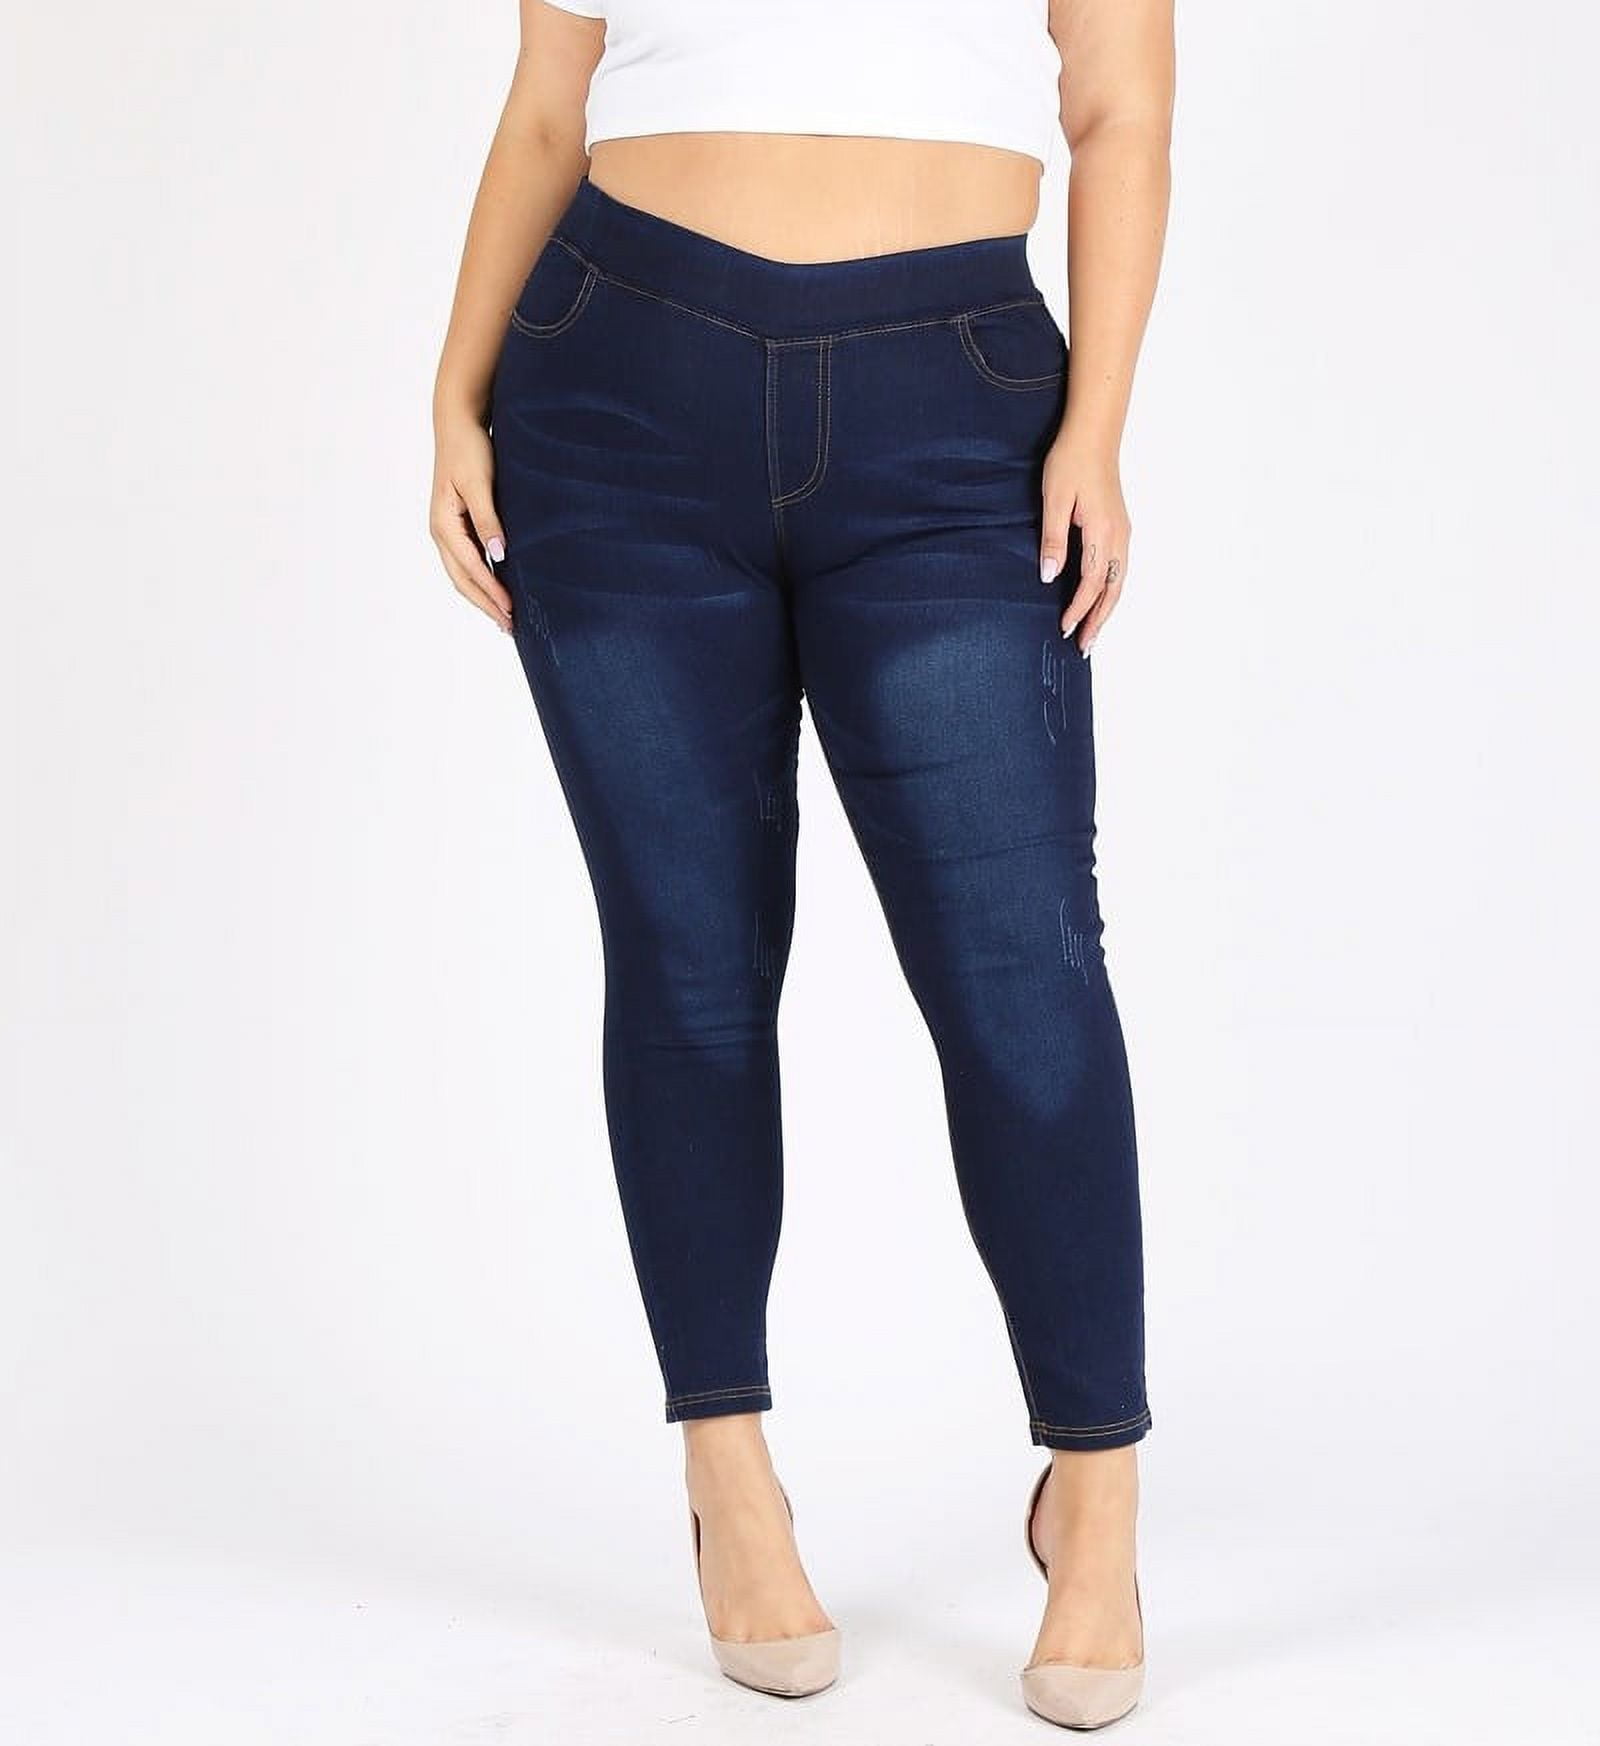 Women's plus size jeggings pull-on stretch fashion jeans with a